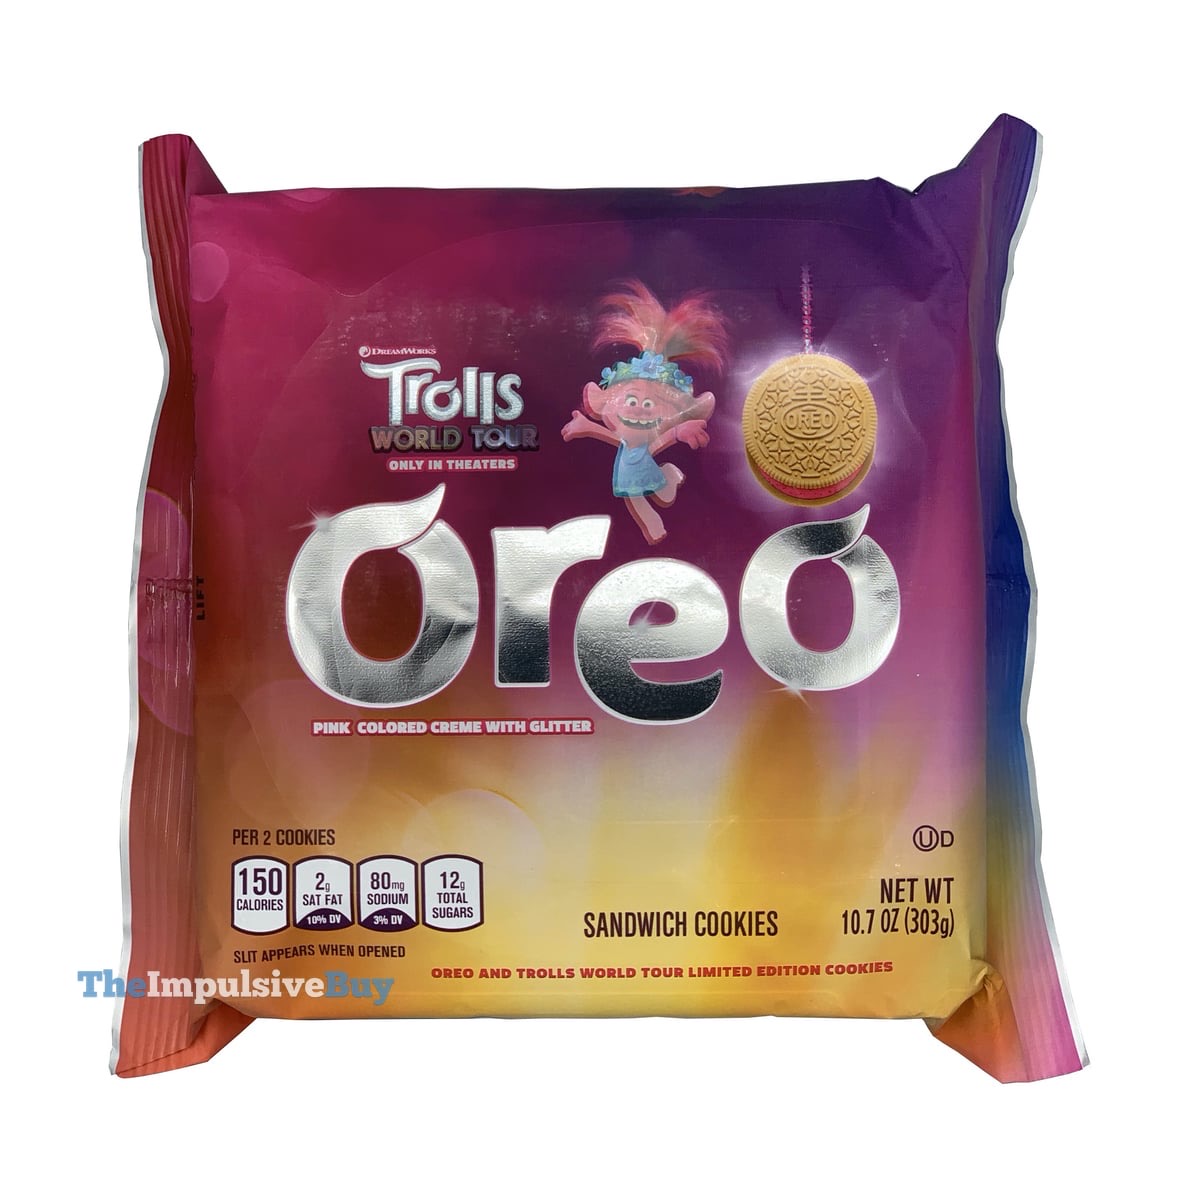 REVIEW: Trolls World Tour Limited Edition Oreo Cookies - The Impulsive Buy